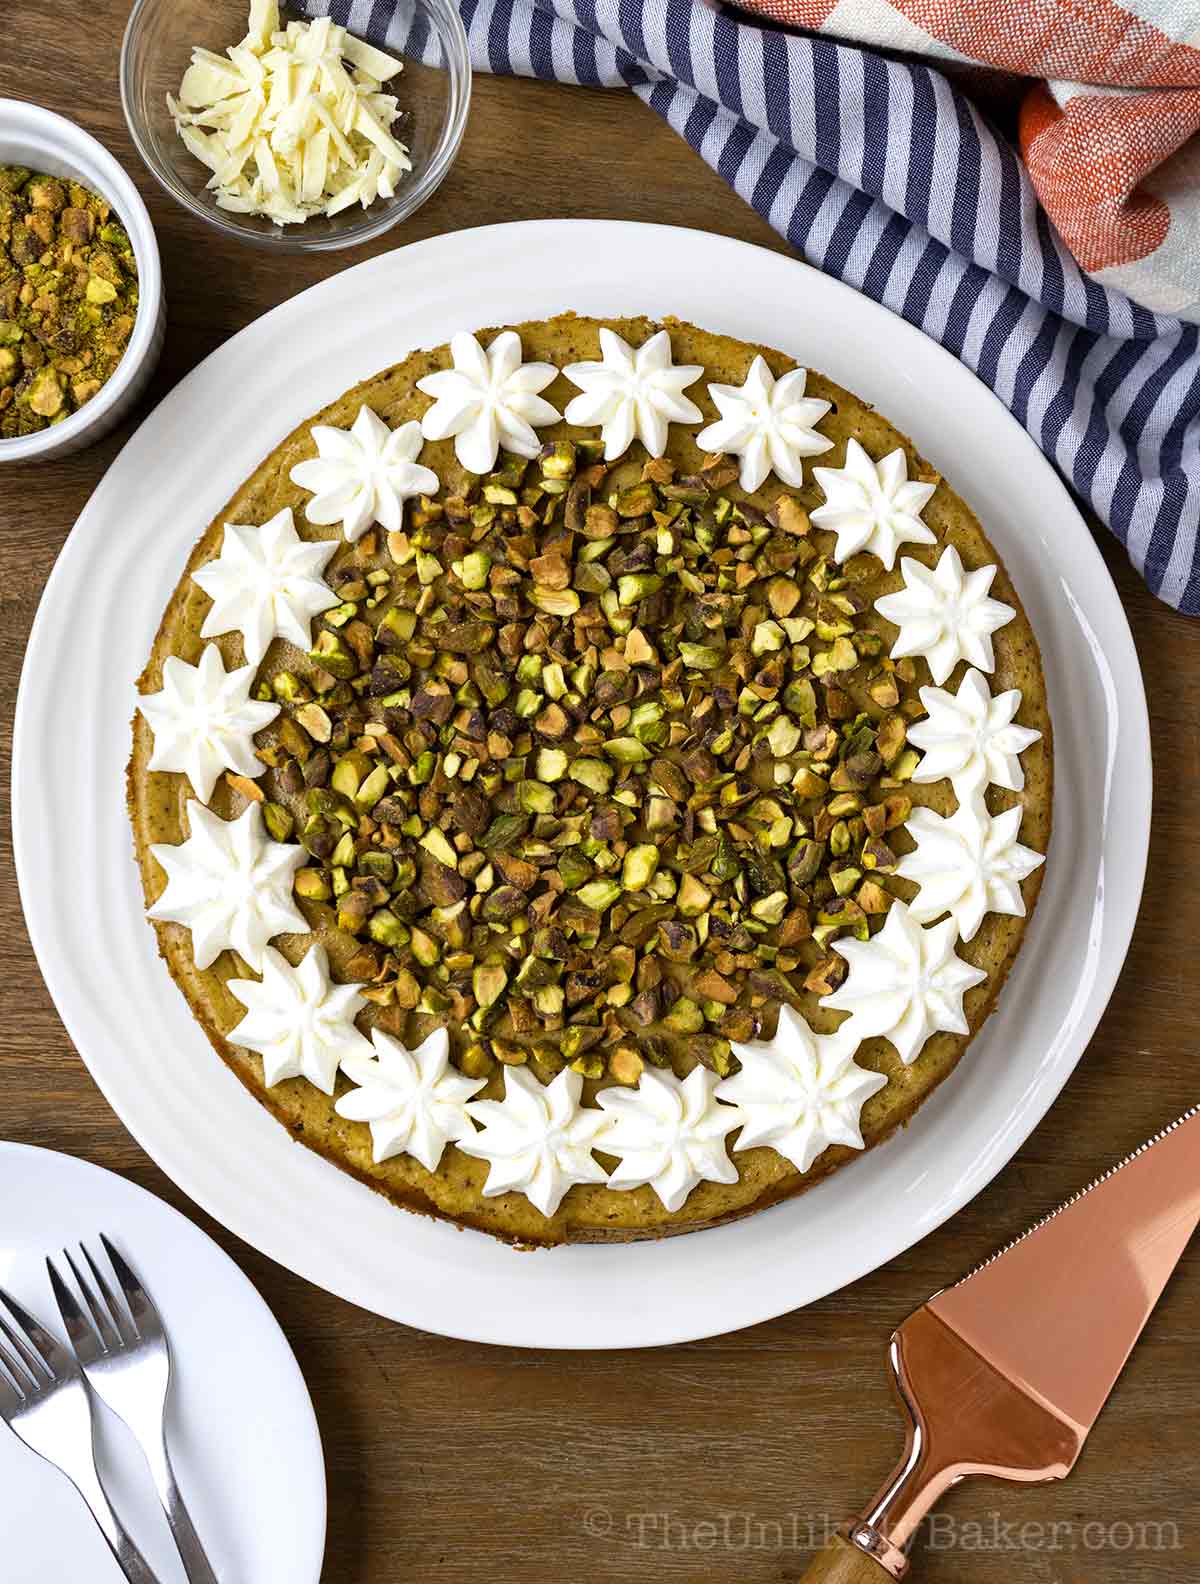 Overhead shot of pistachio cheesecake ready to serve.